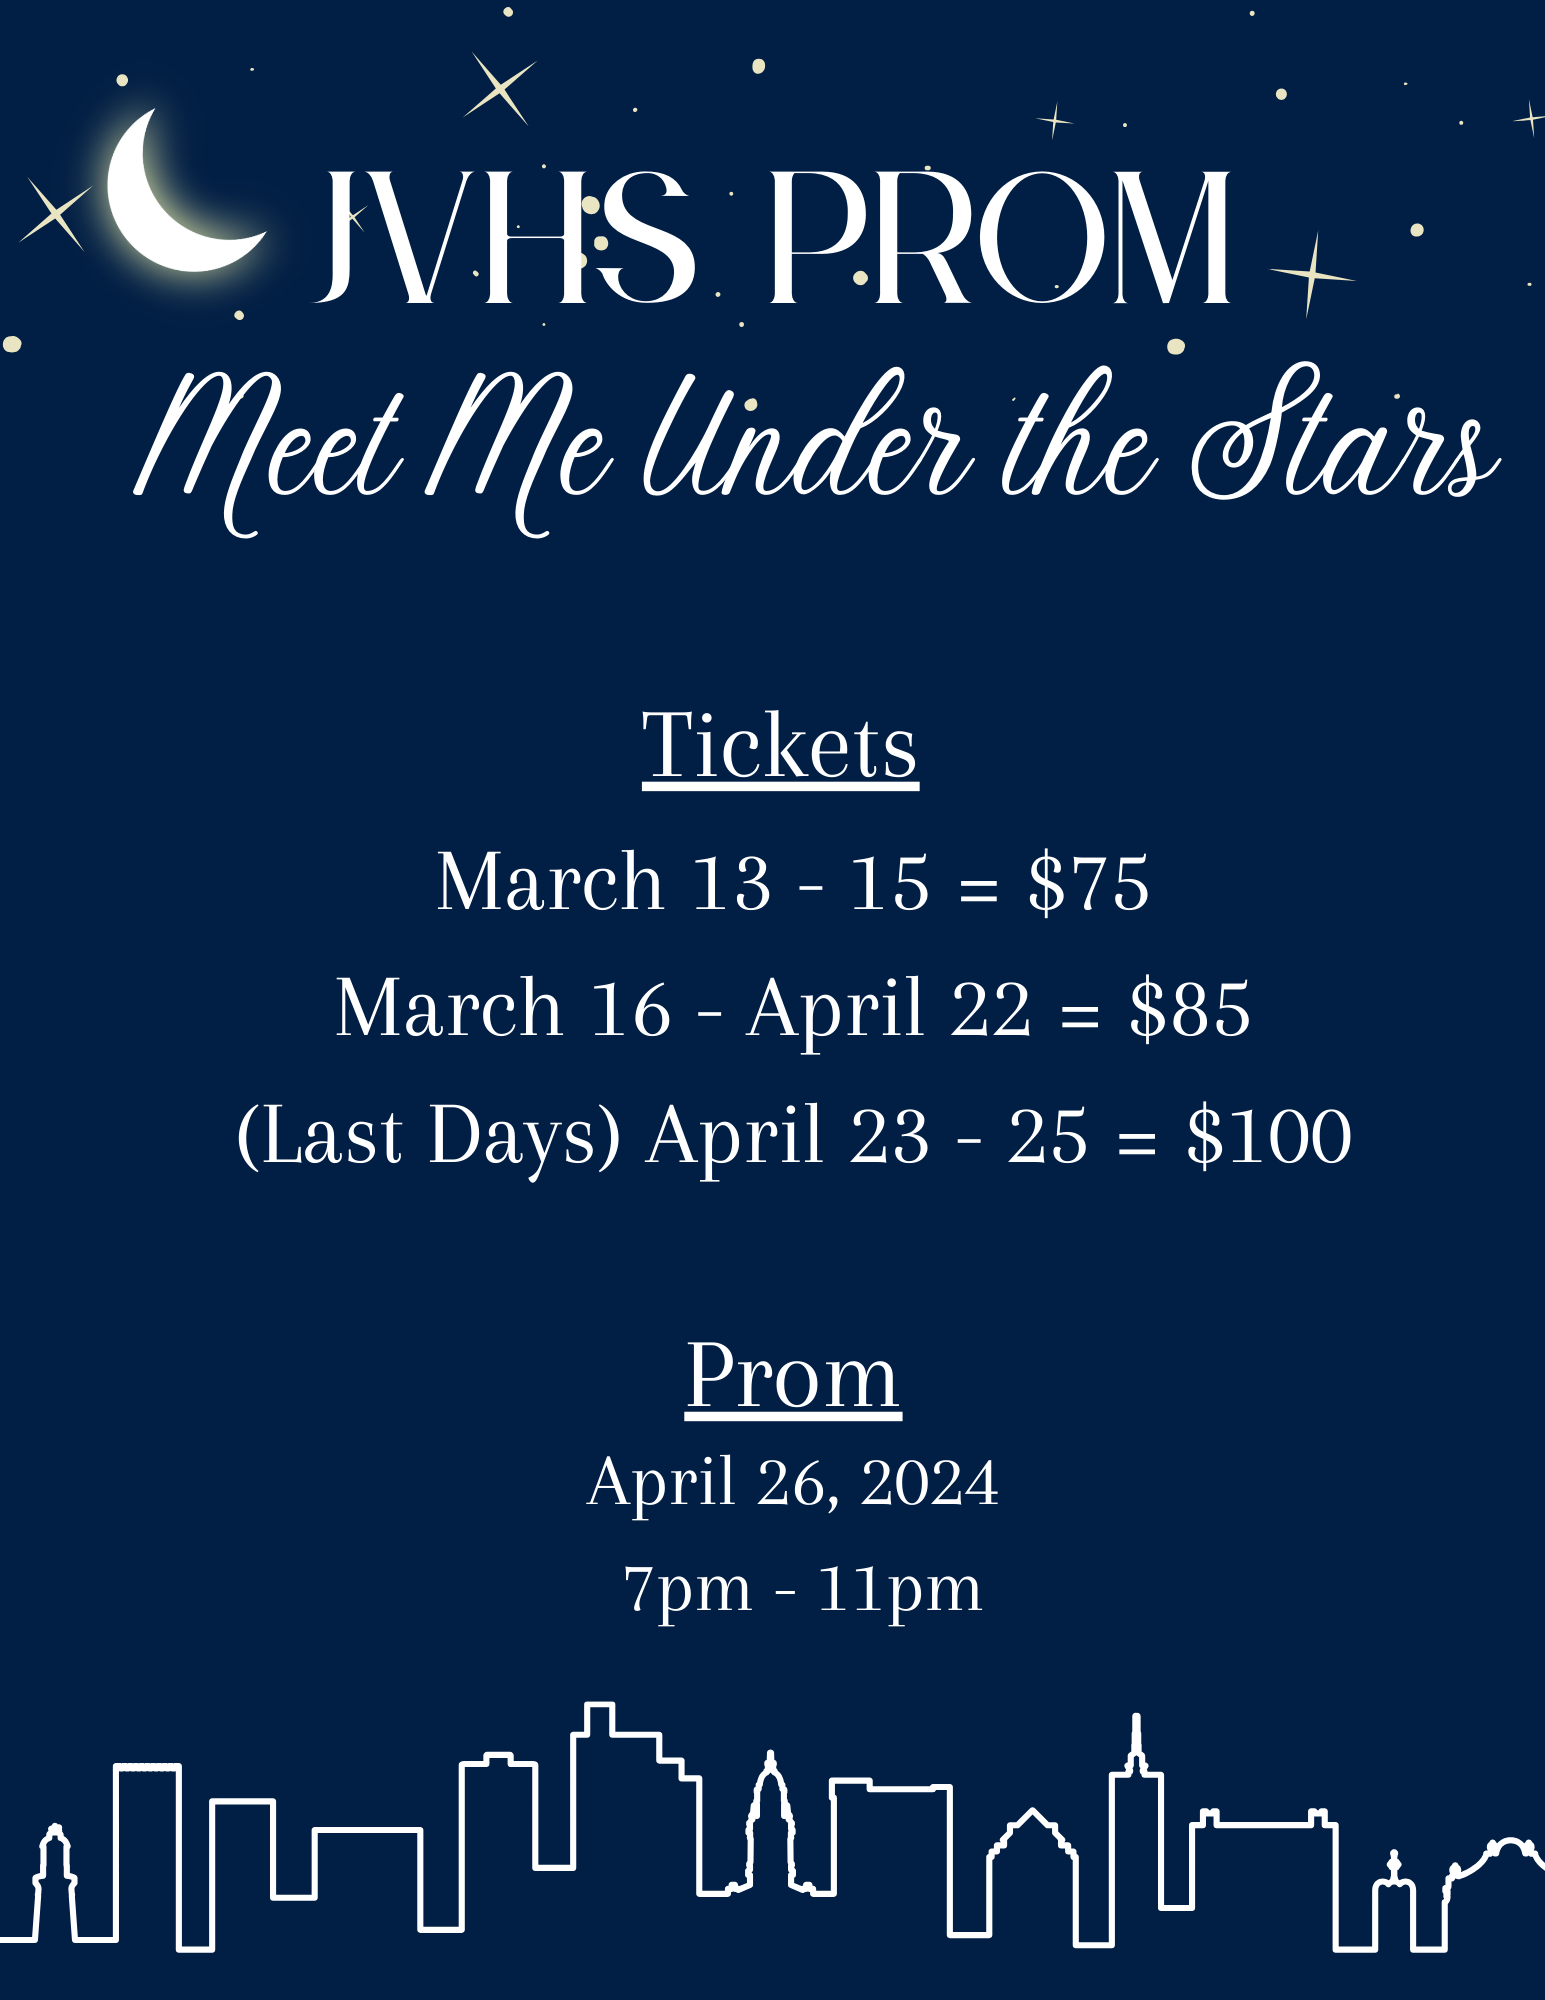 JVHS Prom Price Info.png